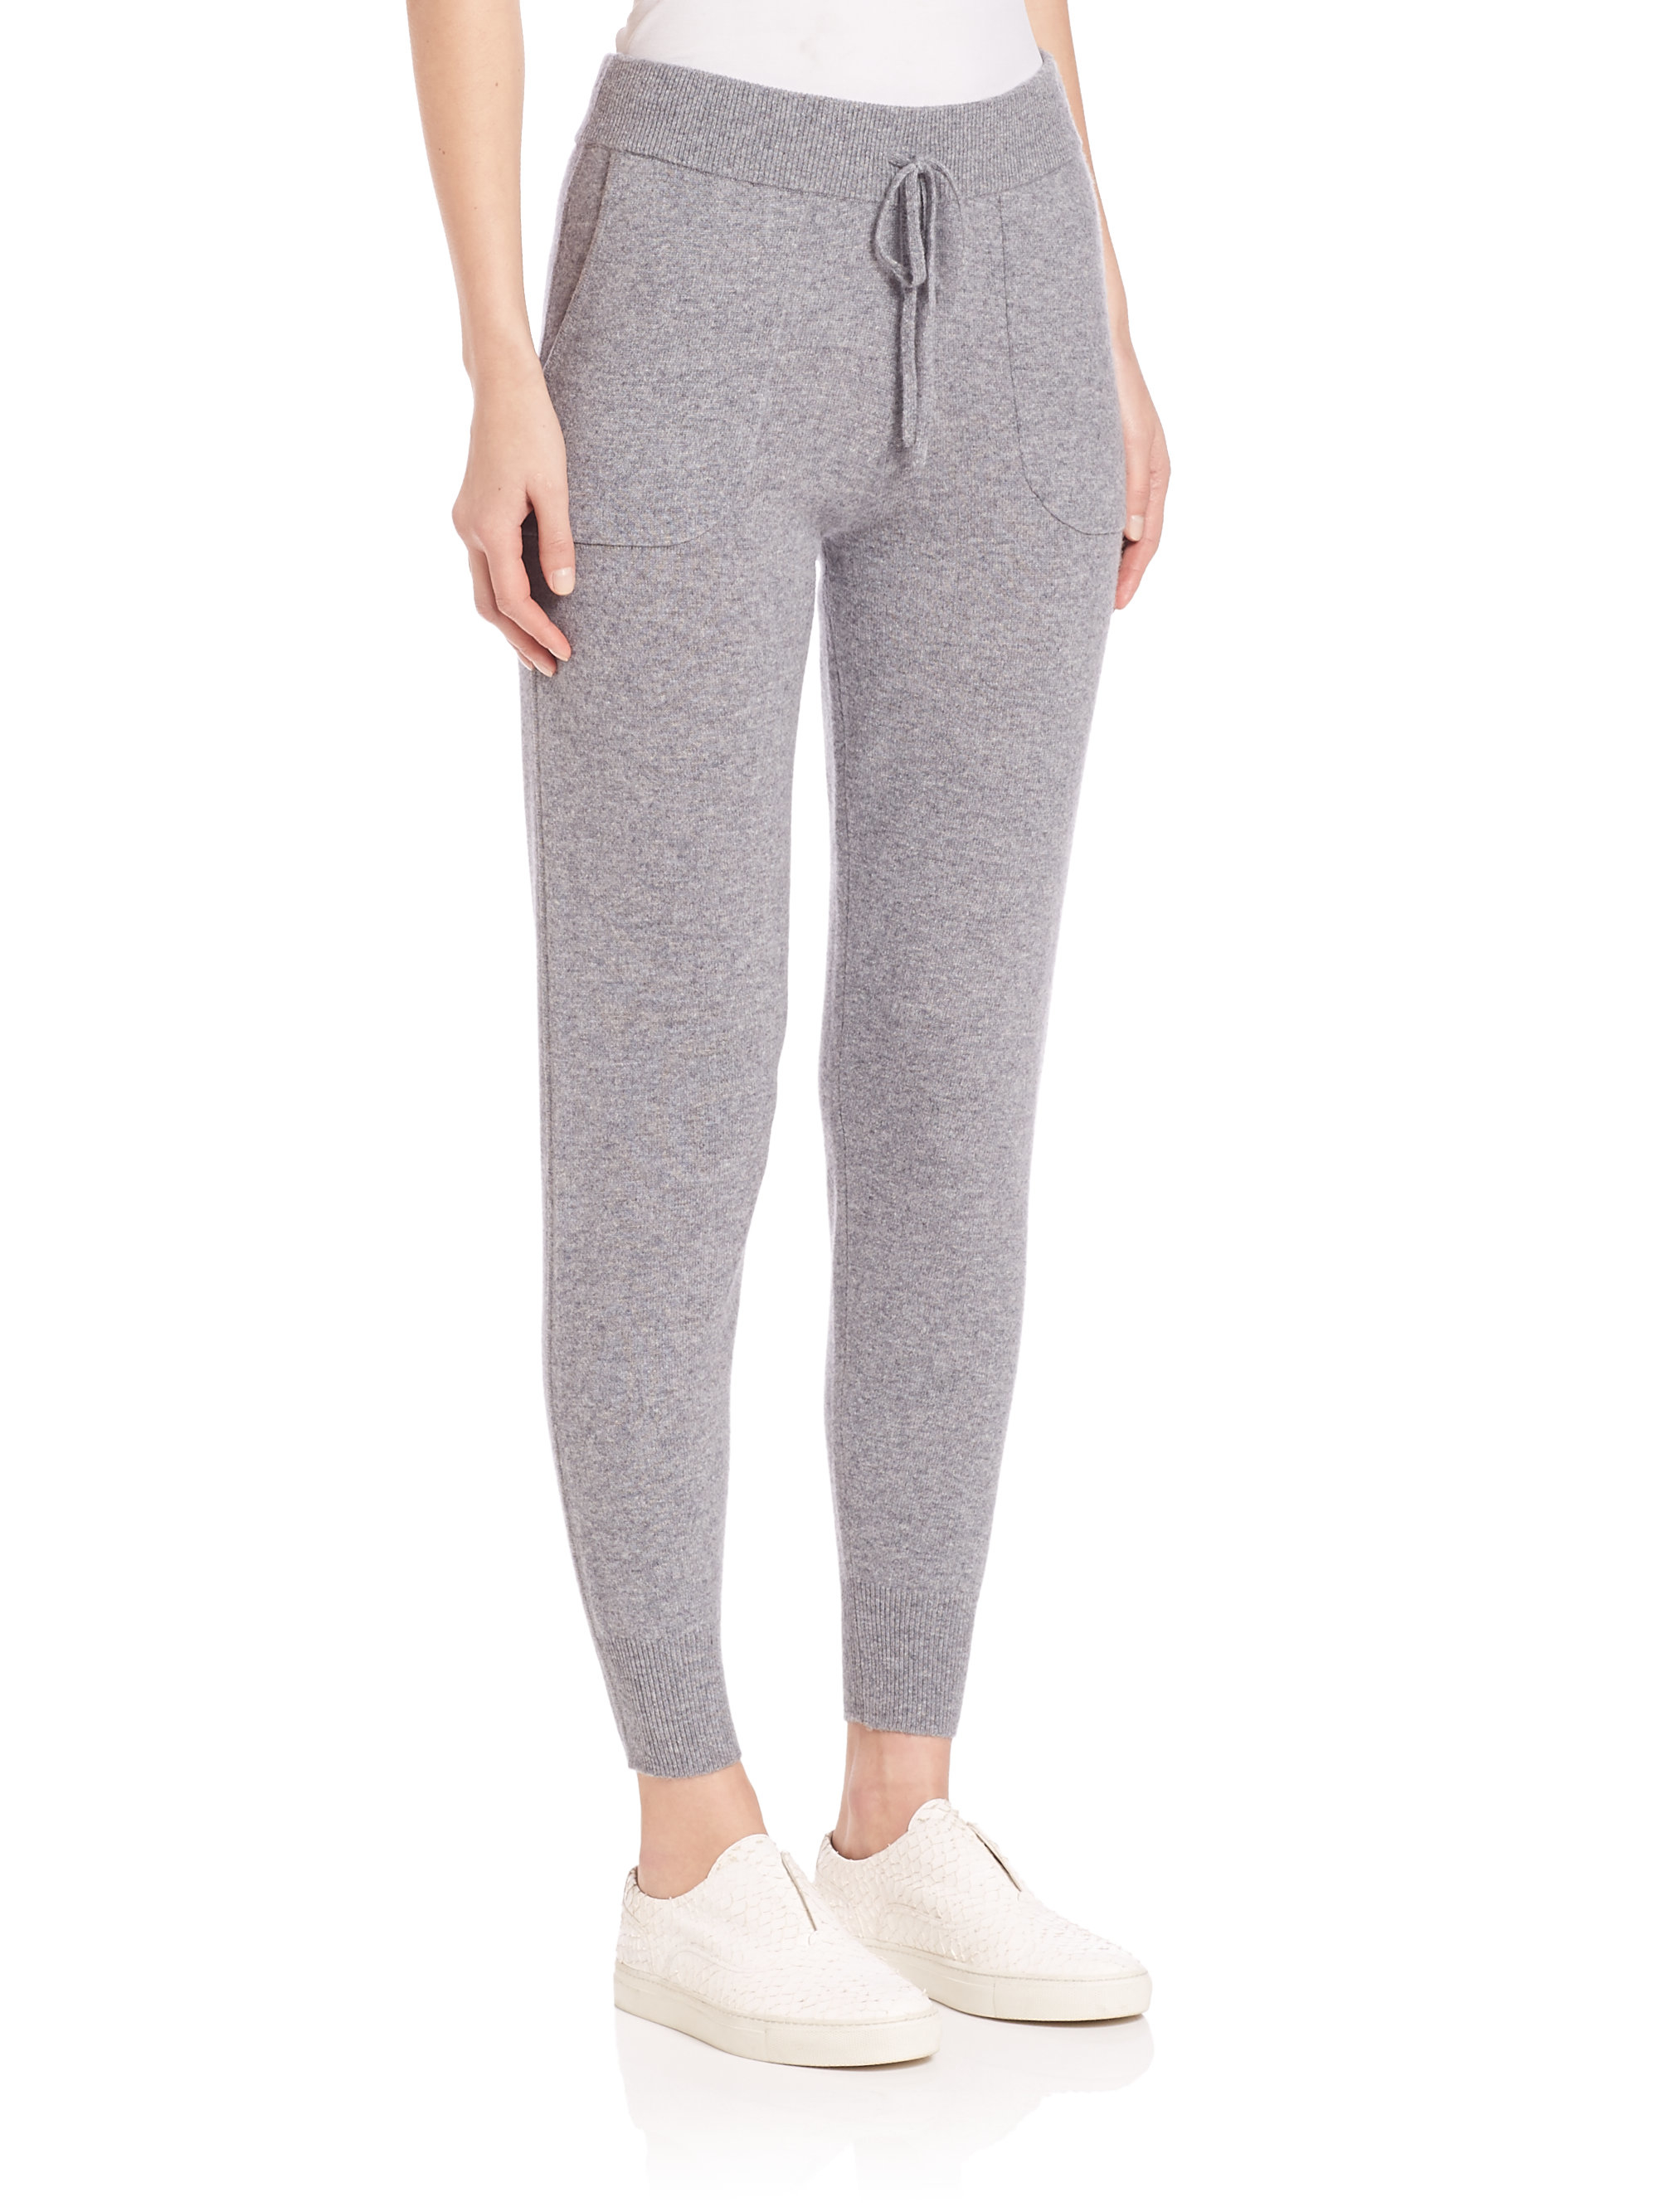 Lyst - Theory Arleena Cashmere Jogger Pants in Gray